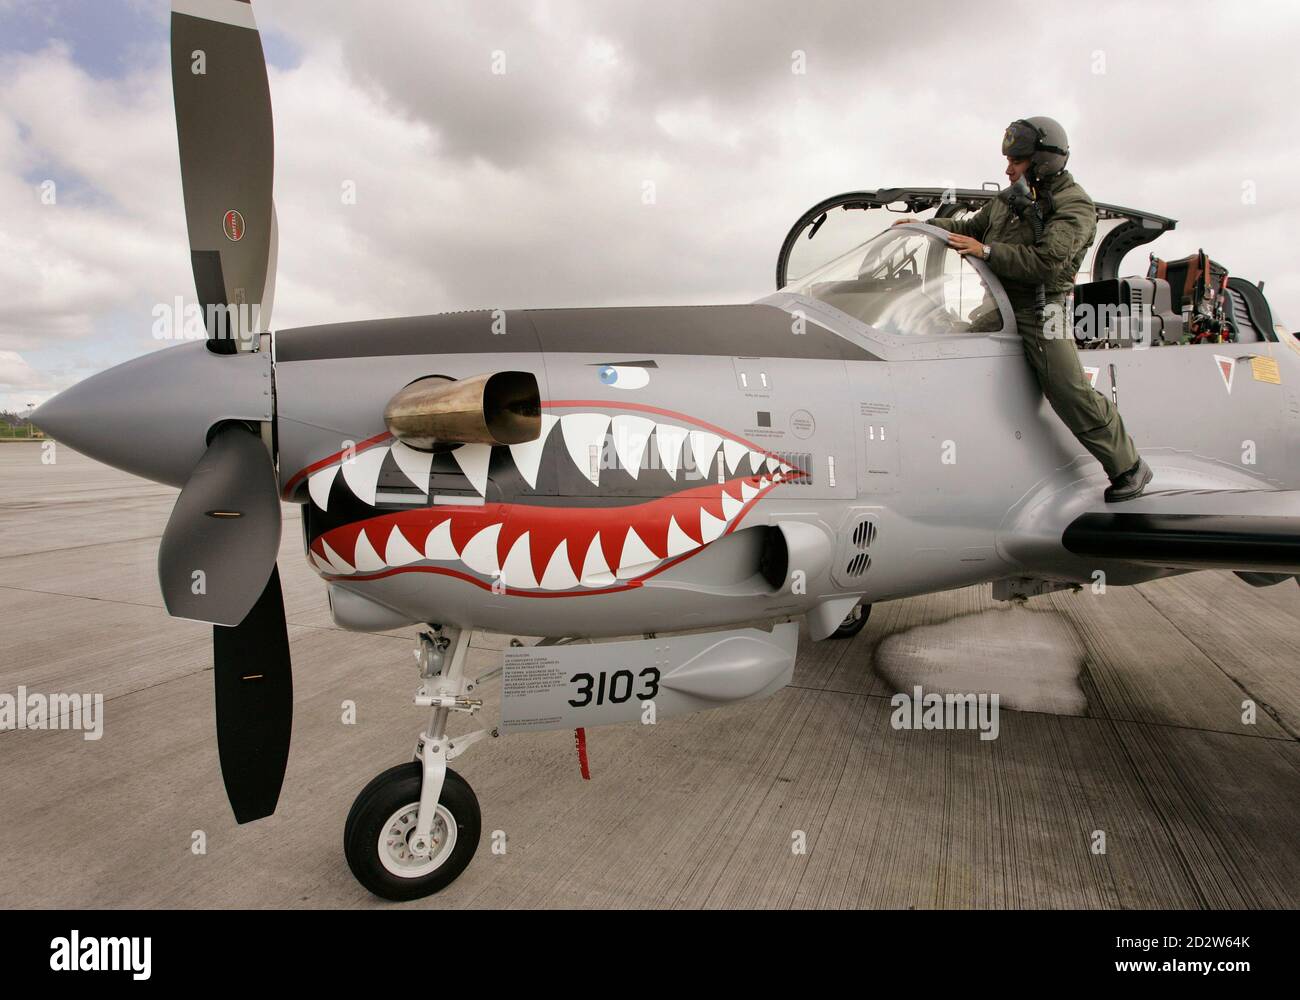 A Colombian airforce pilot boards a Tucano turboprop plane at Bogota's military airport of Catam, December 14, 2006. Brazil delivered three military planes in Colombia in a move that Colombia's biggest rebel group characterized as meddling in its four-decade fight to establish a socialist state. The Super Tucano turboprop planes, made by Embraer, are part of a bigger order of 25 aircraft worth $235 million.  REUTERS/Jose Miguel Gomez         (COLOMBIA) Stock Photo